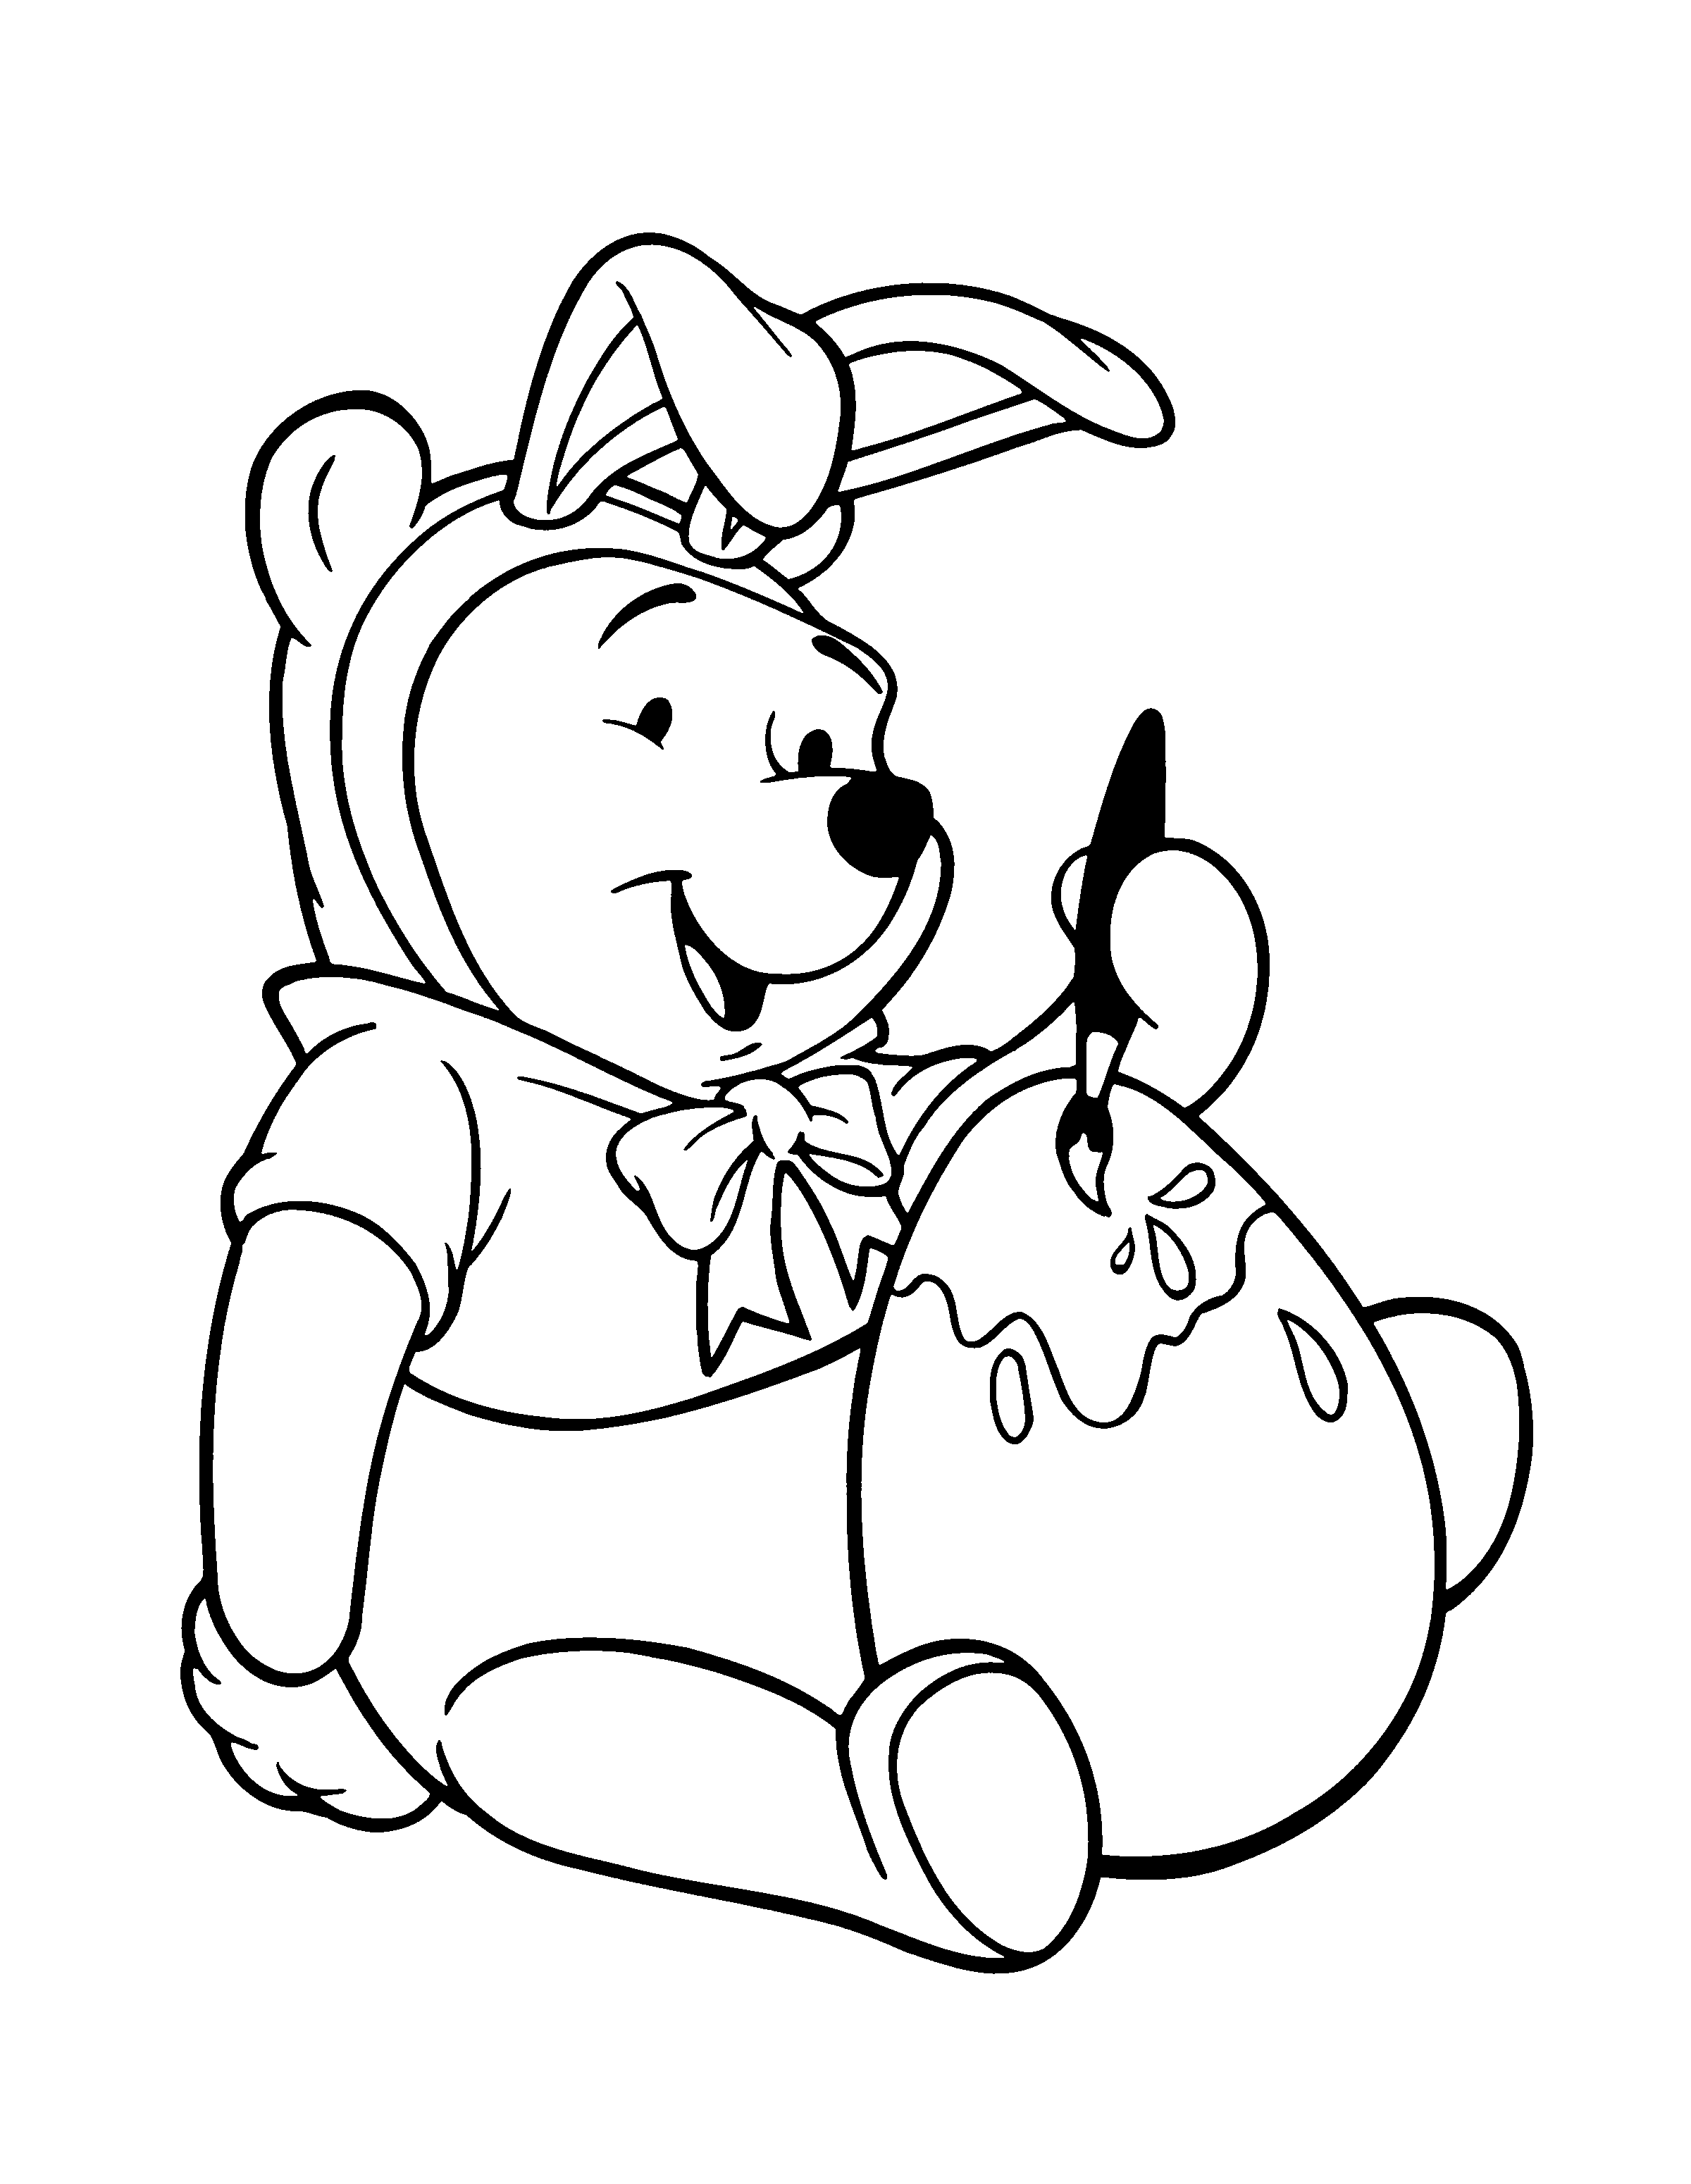 Easter Winnie the Pooh Coloring Pages | Easter coloring pages, Easter  drawings, Easter coloring pictures